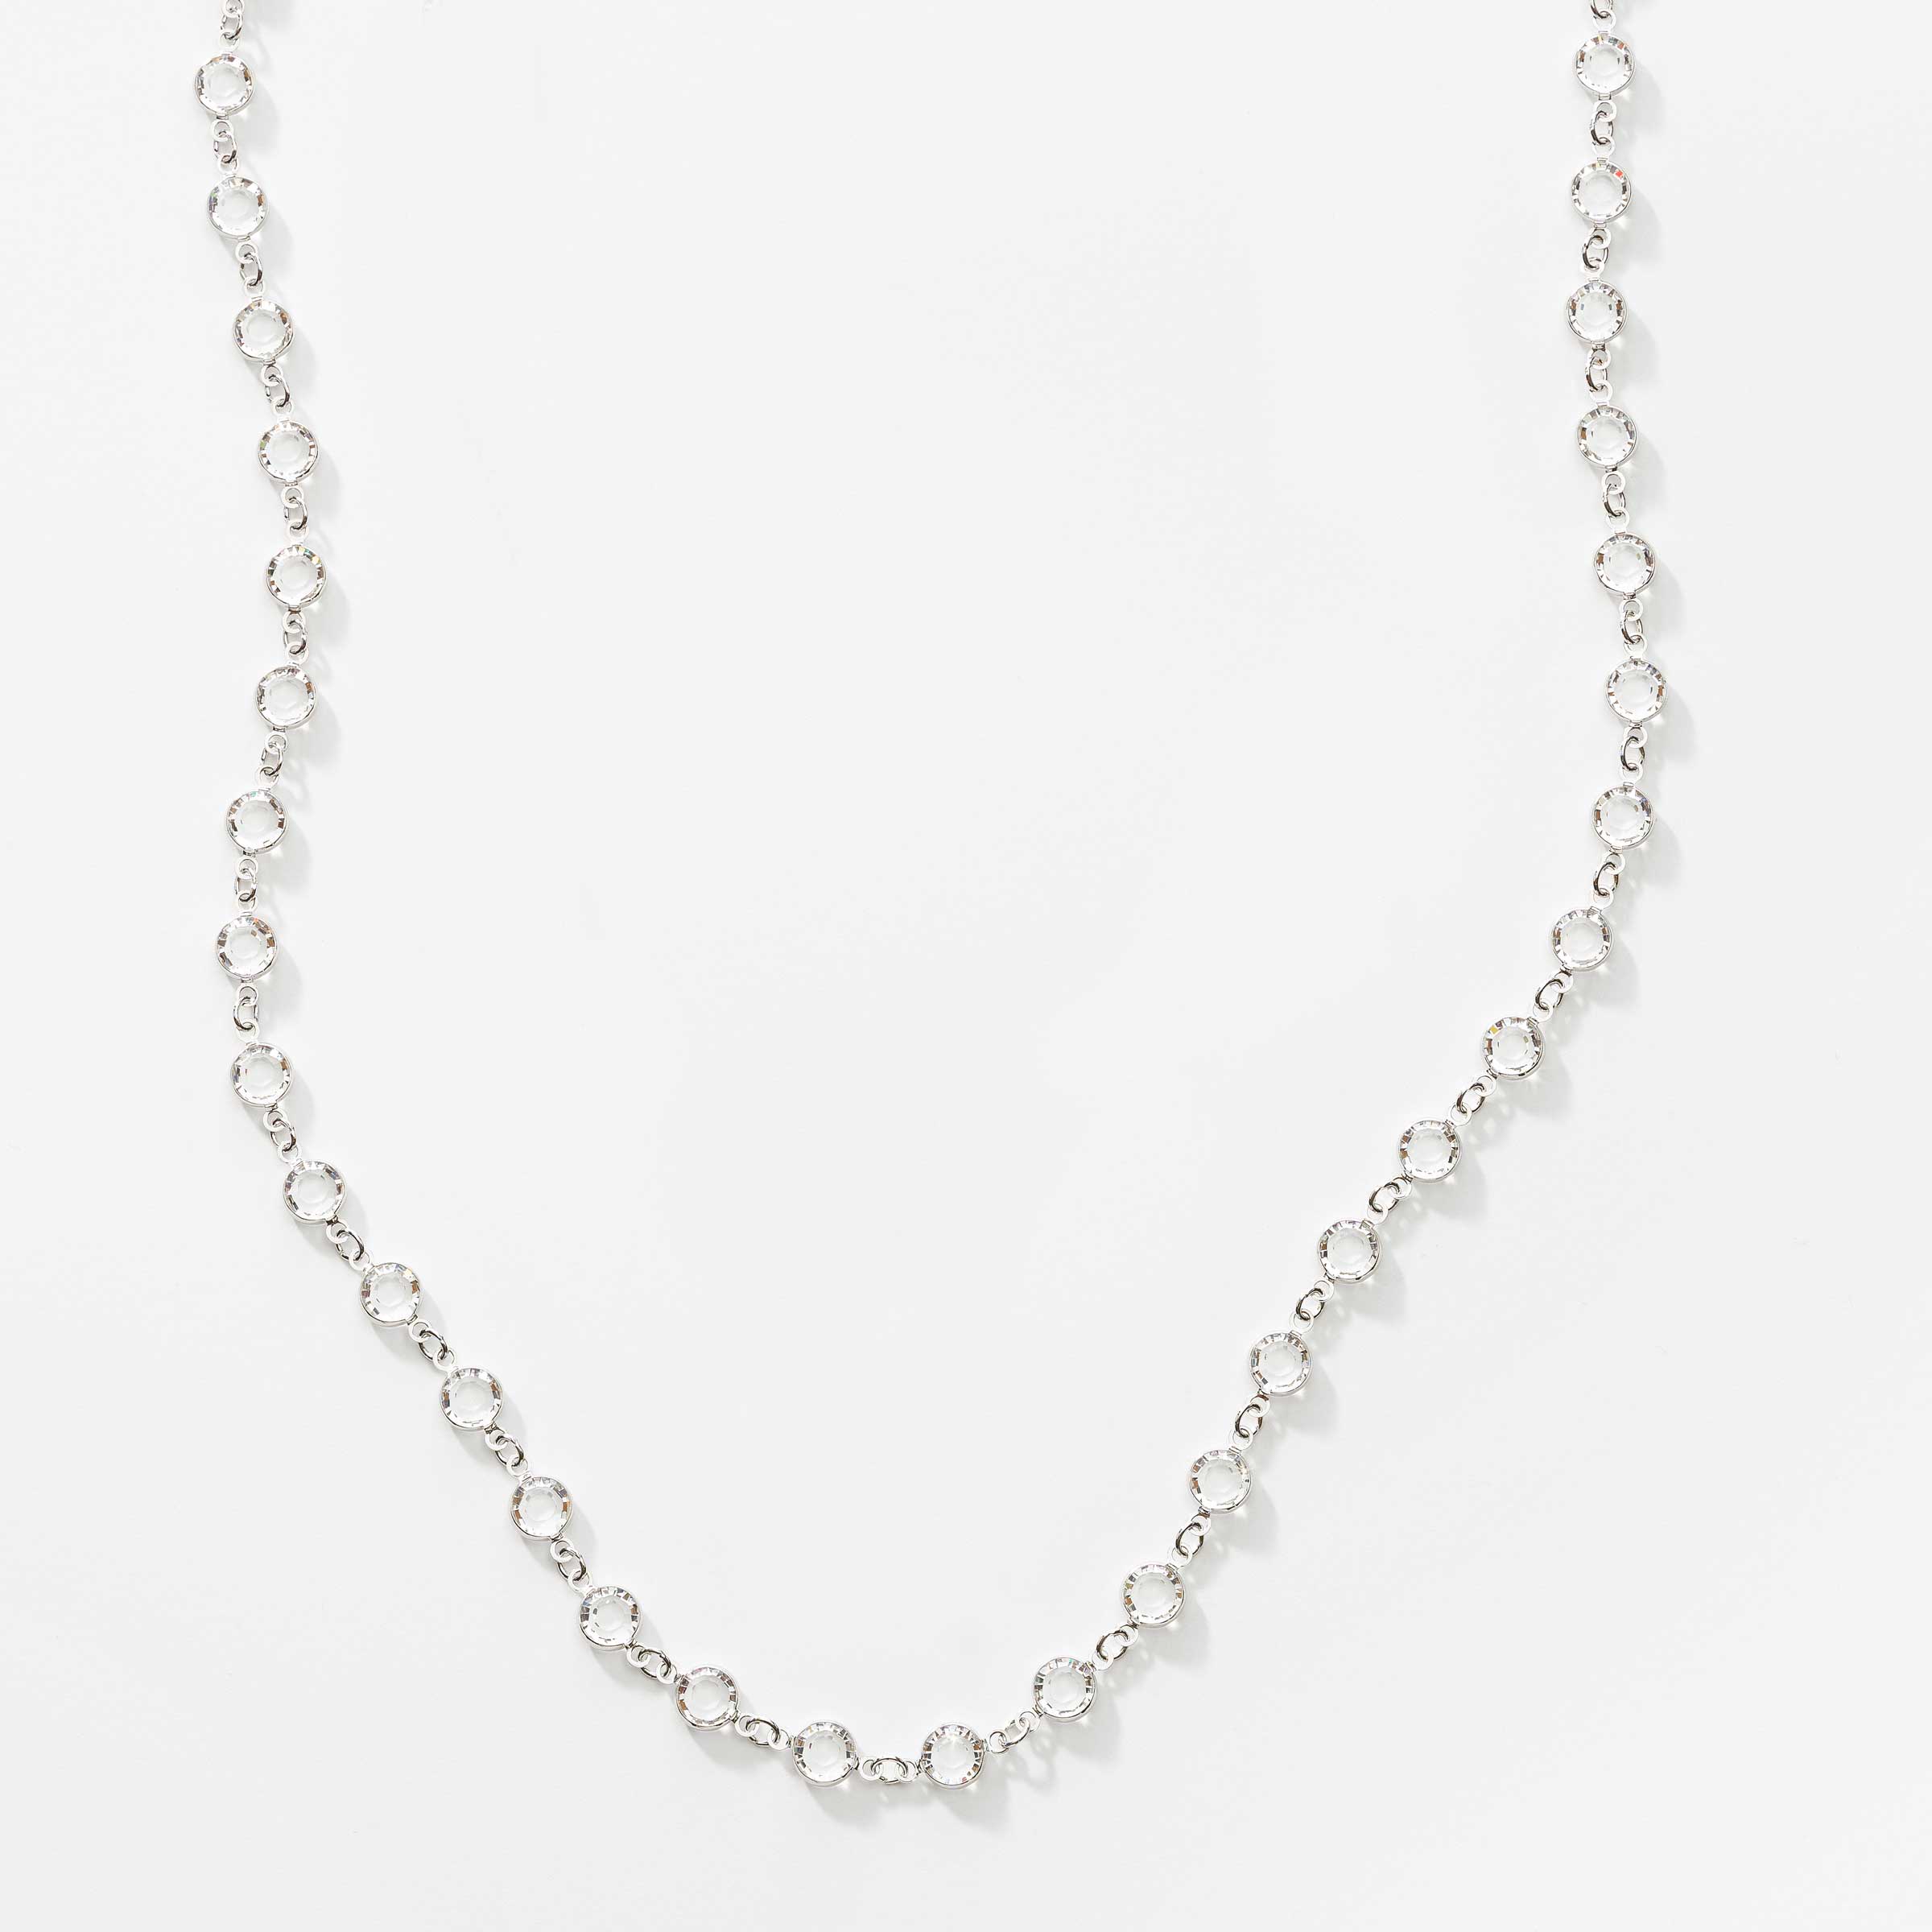 Chanelle Necklace, Crystal